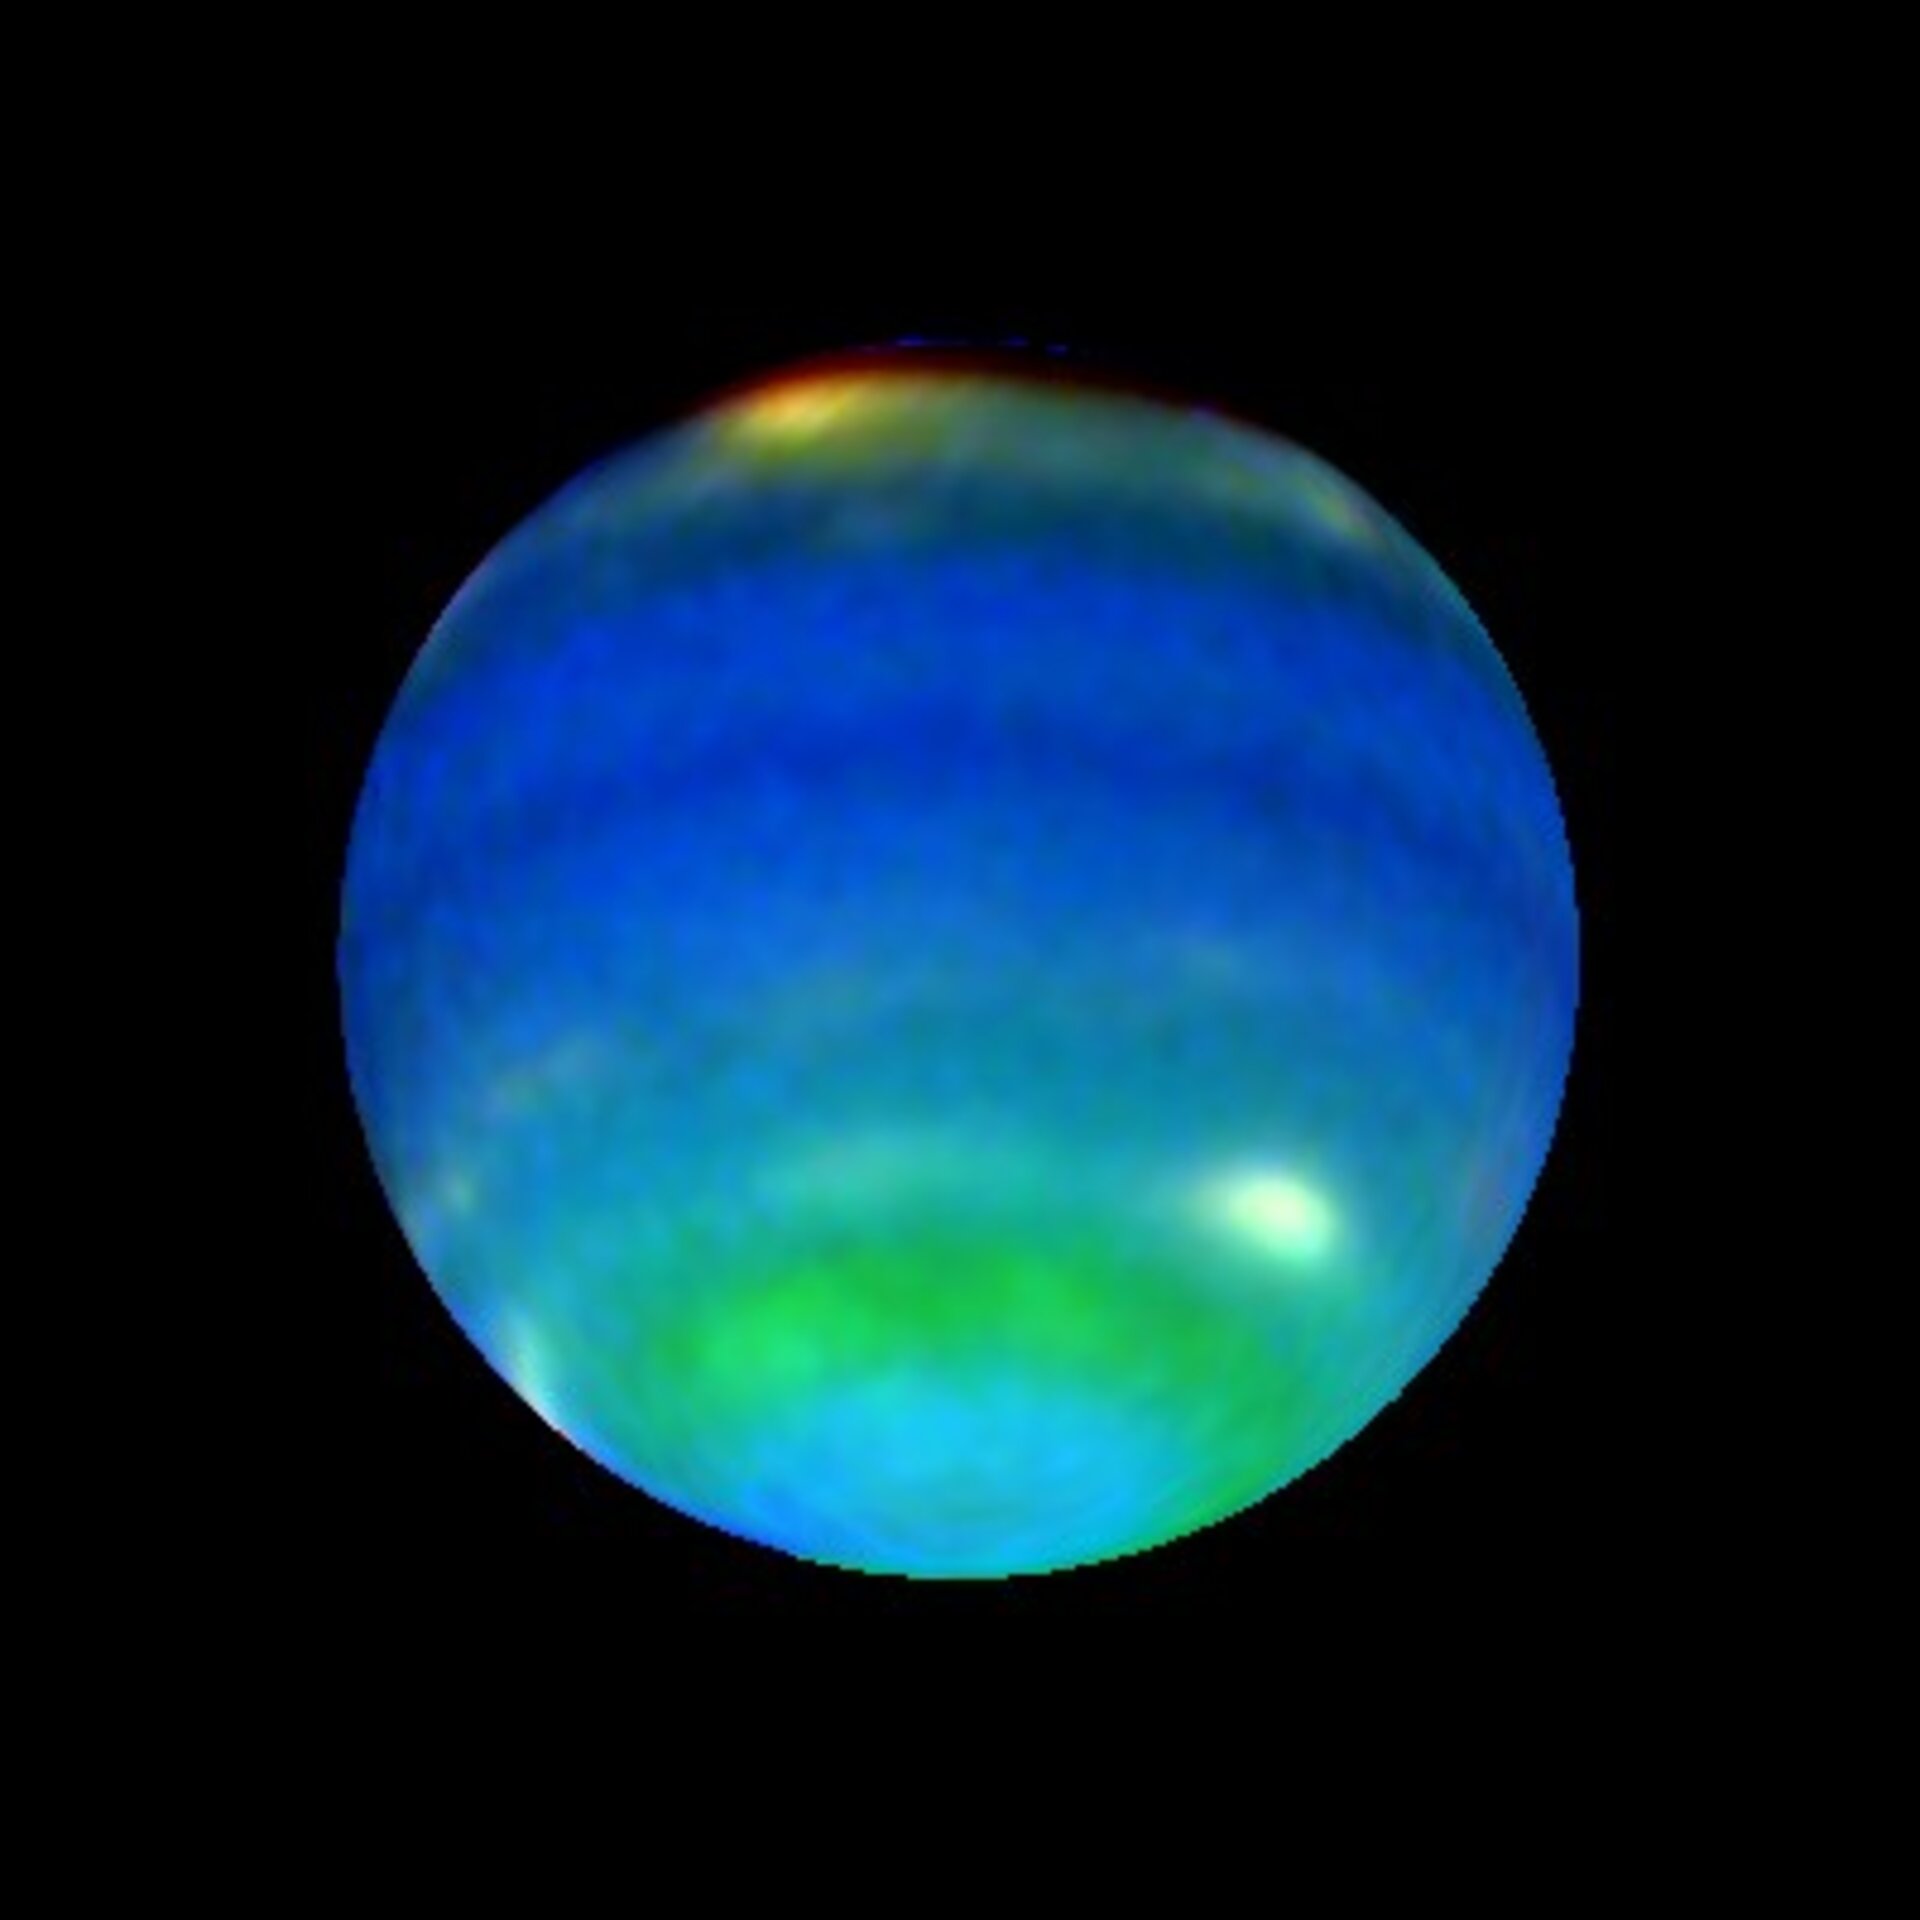 Neptune - discovered due to Bouvard's calculations